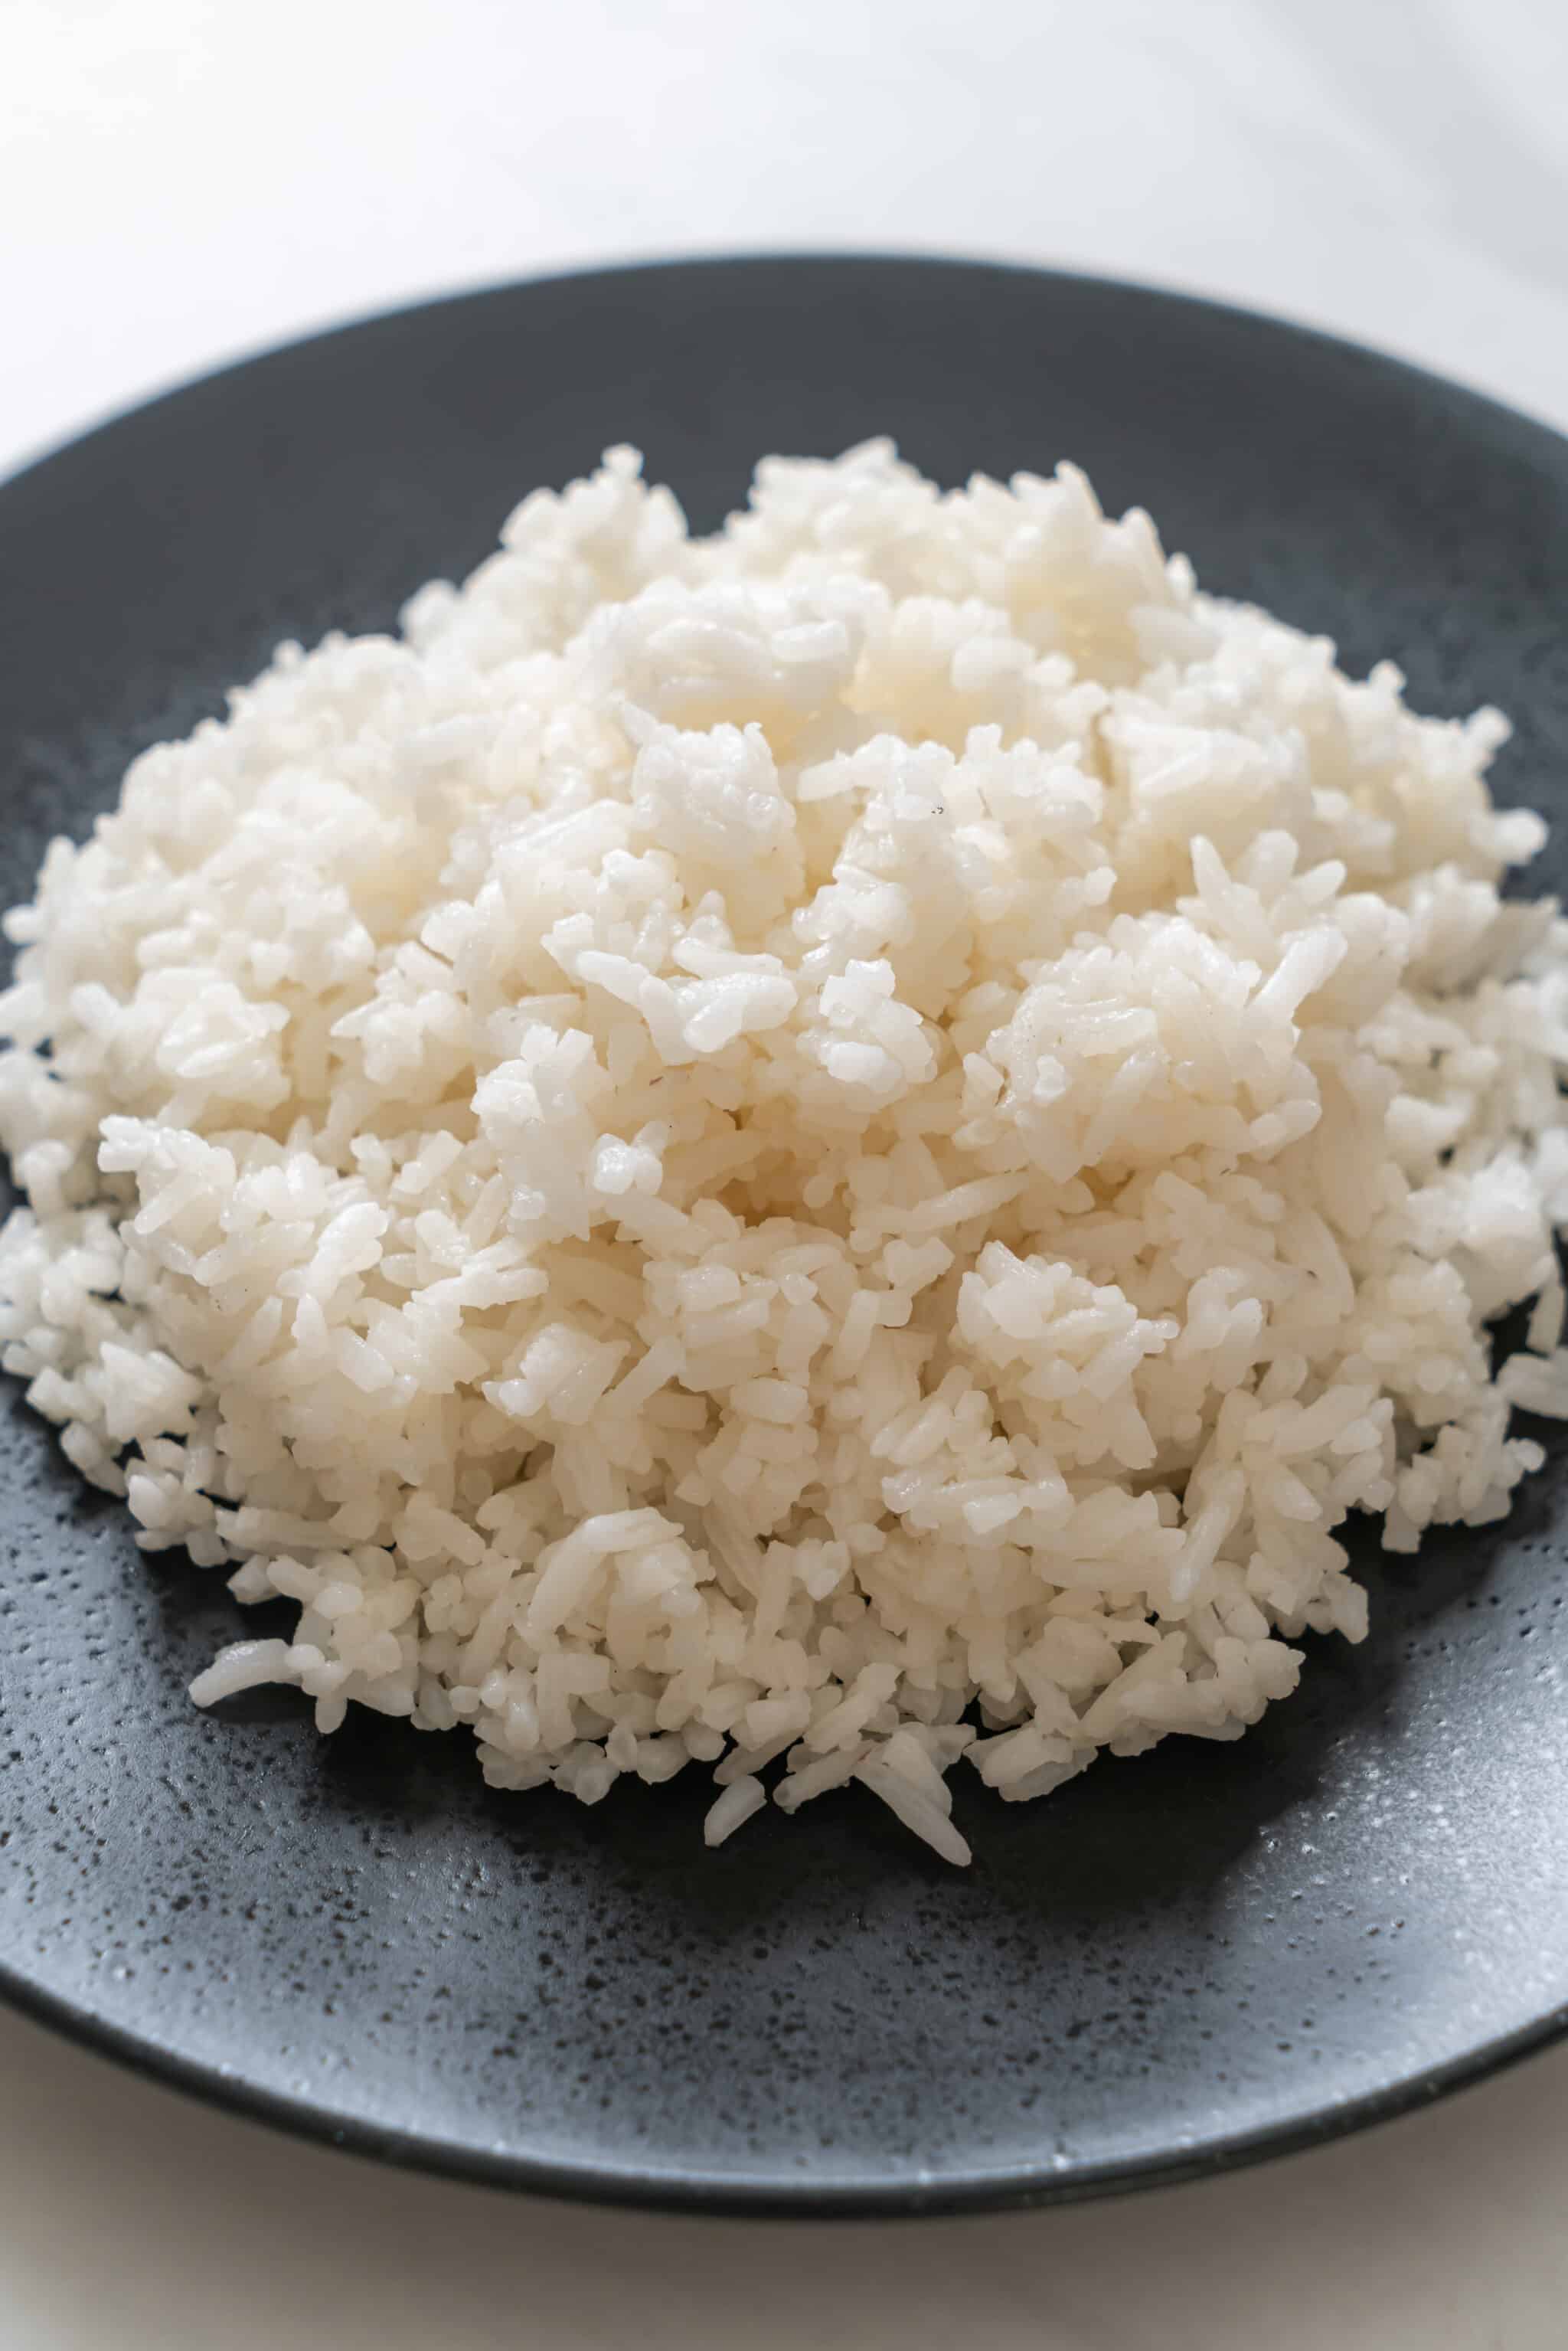 How long to Cook Rice in a Microwave